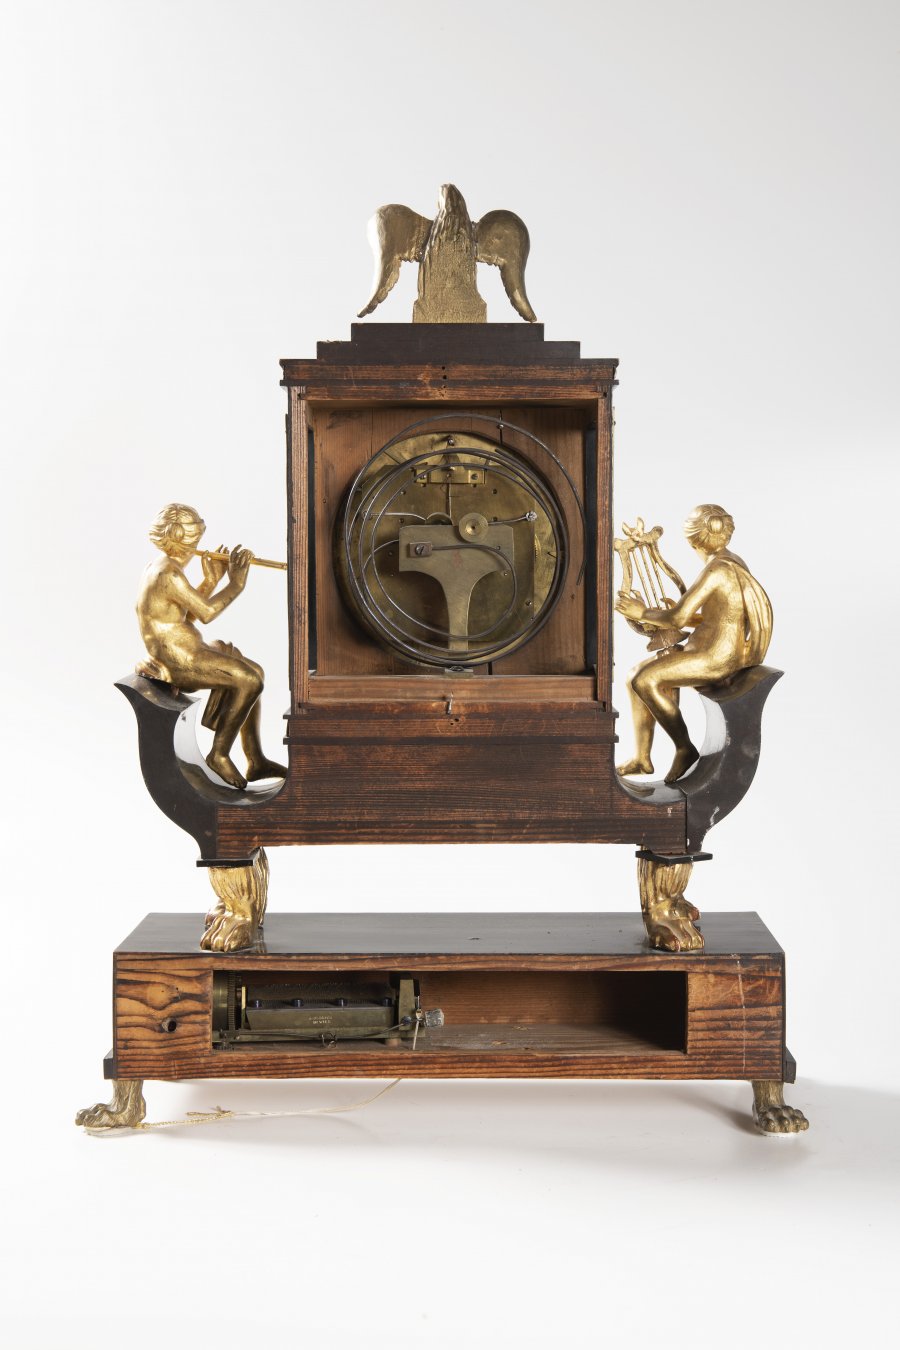 AN EMPIRE CLOCK WITH MUSIC BOX